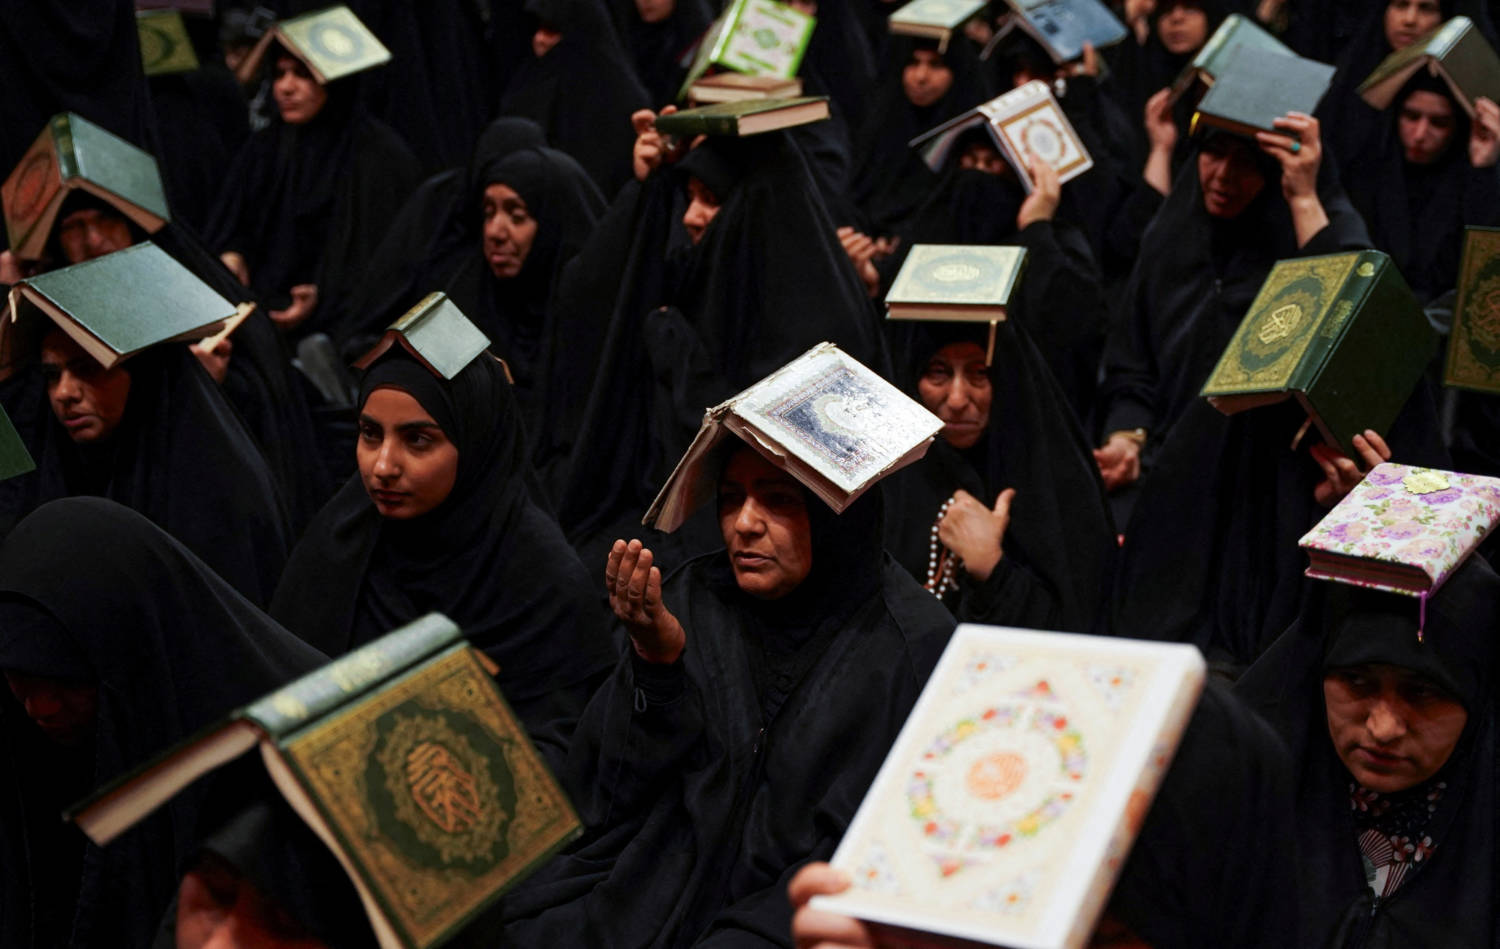 Shi'ite Worshippers Place Copies Of The Koran On Their Heads, During The Holy Month Of Ramadan At Imam Ali Shrine, In Najaf